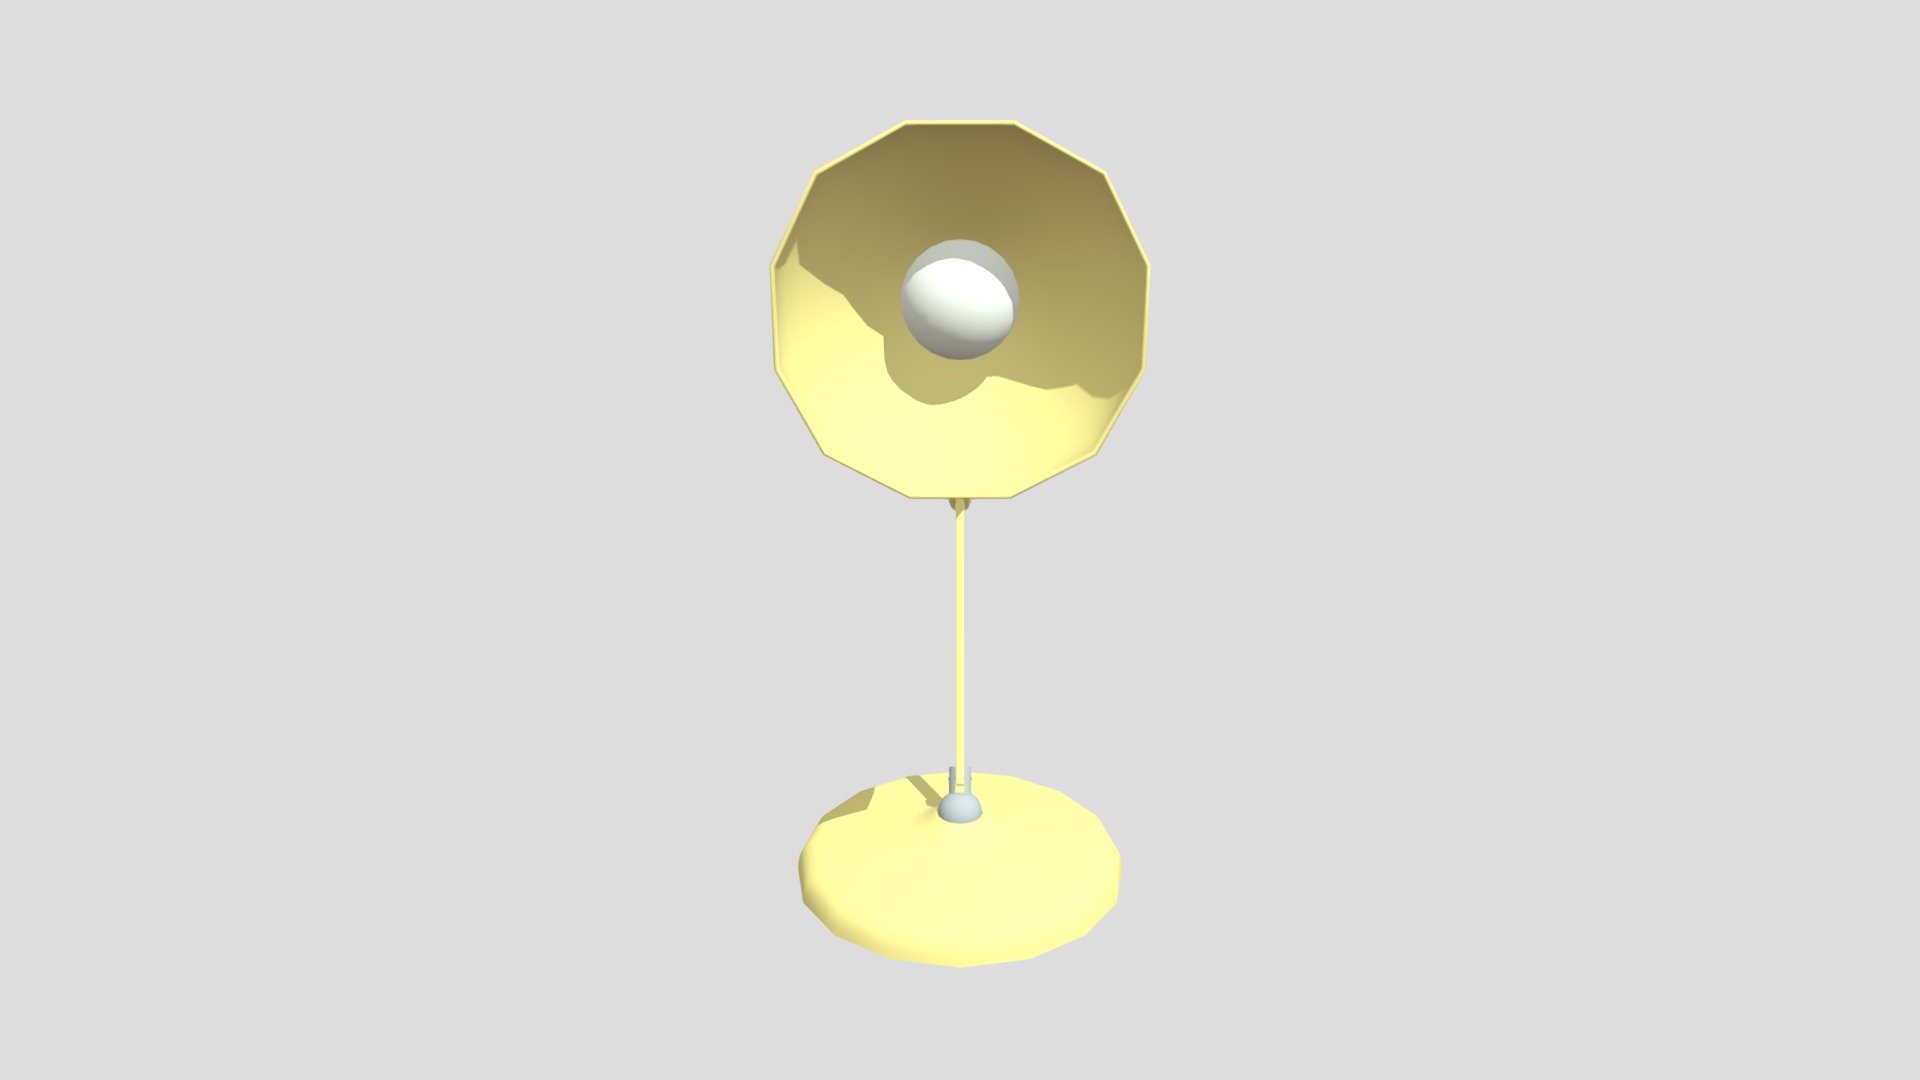 Jumping Lamp - 3D model by s10914136 [f0c05d5] - Sketchfab